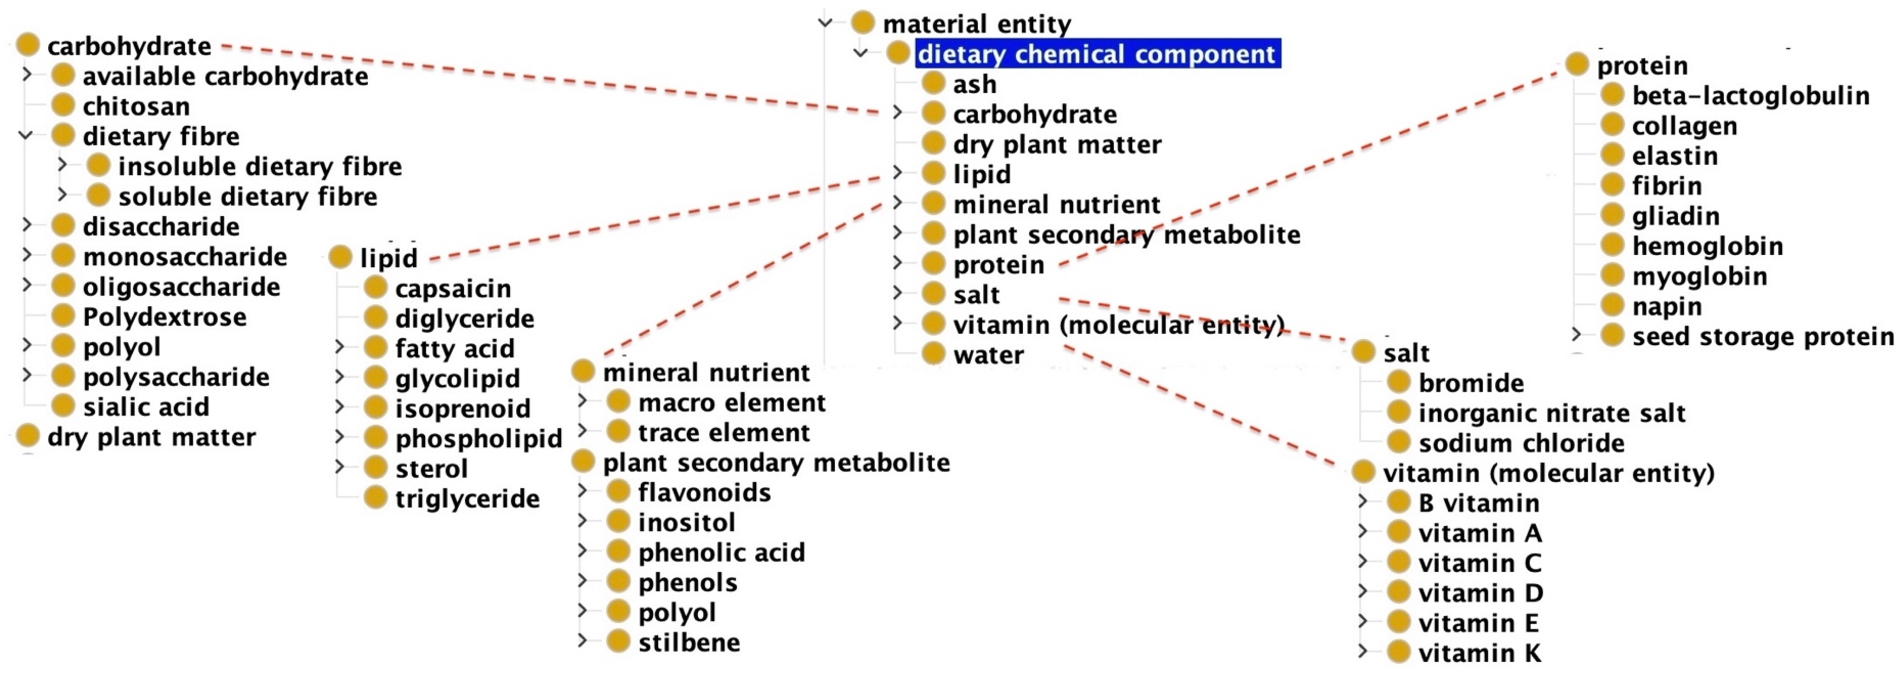 The top level CDNO ‘dietary chemical component” class and its subclasses, most of which are imported from ChEBI.